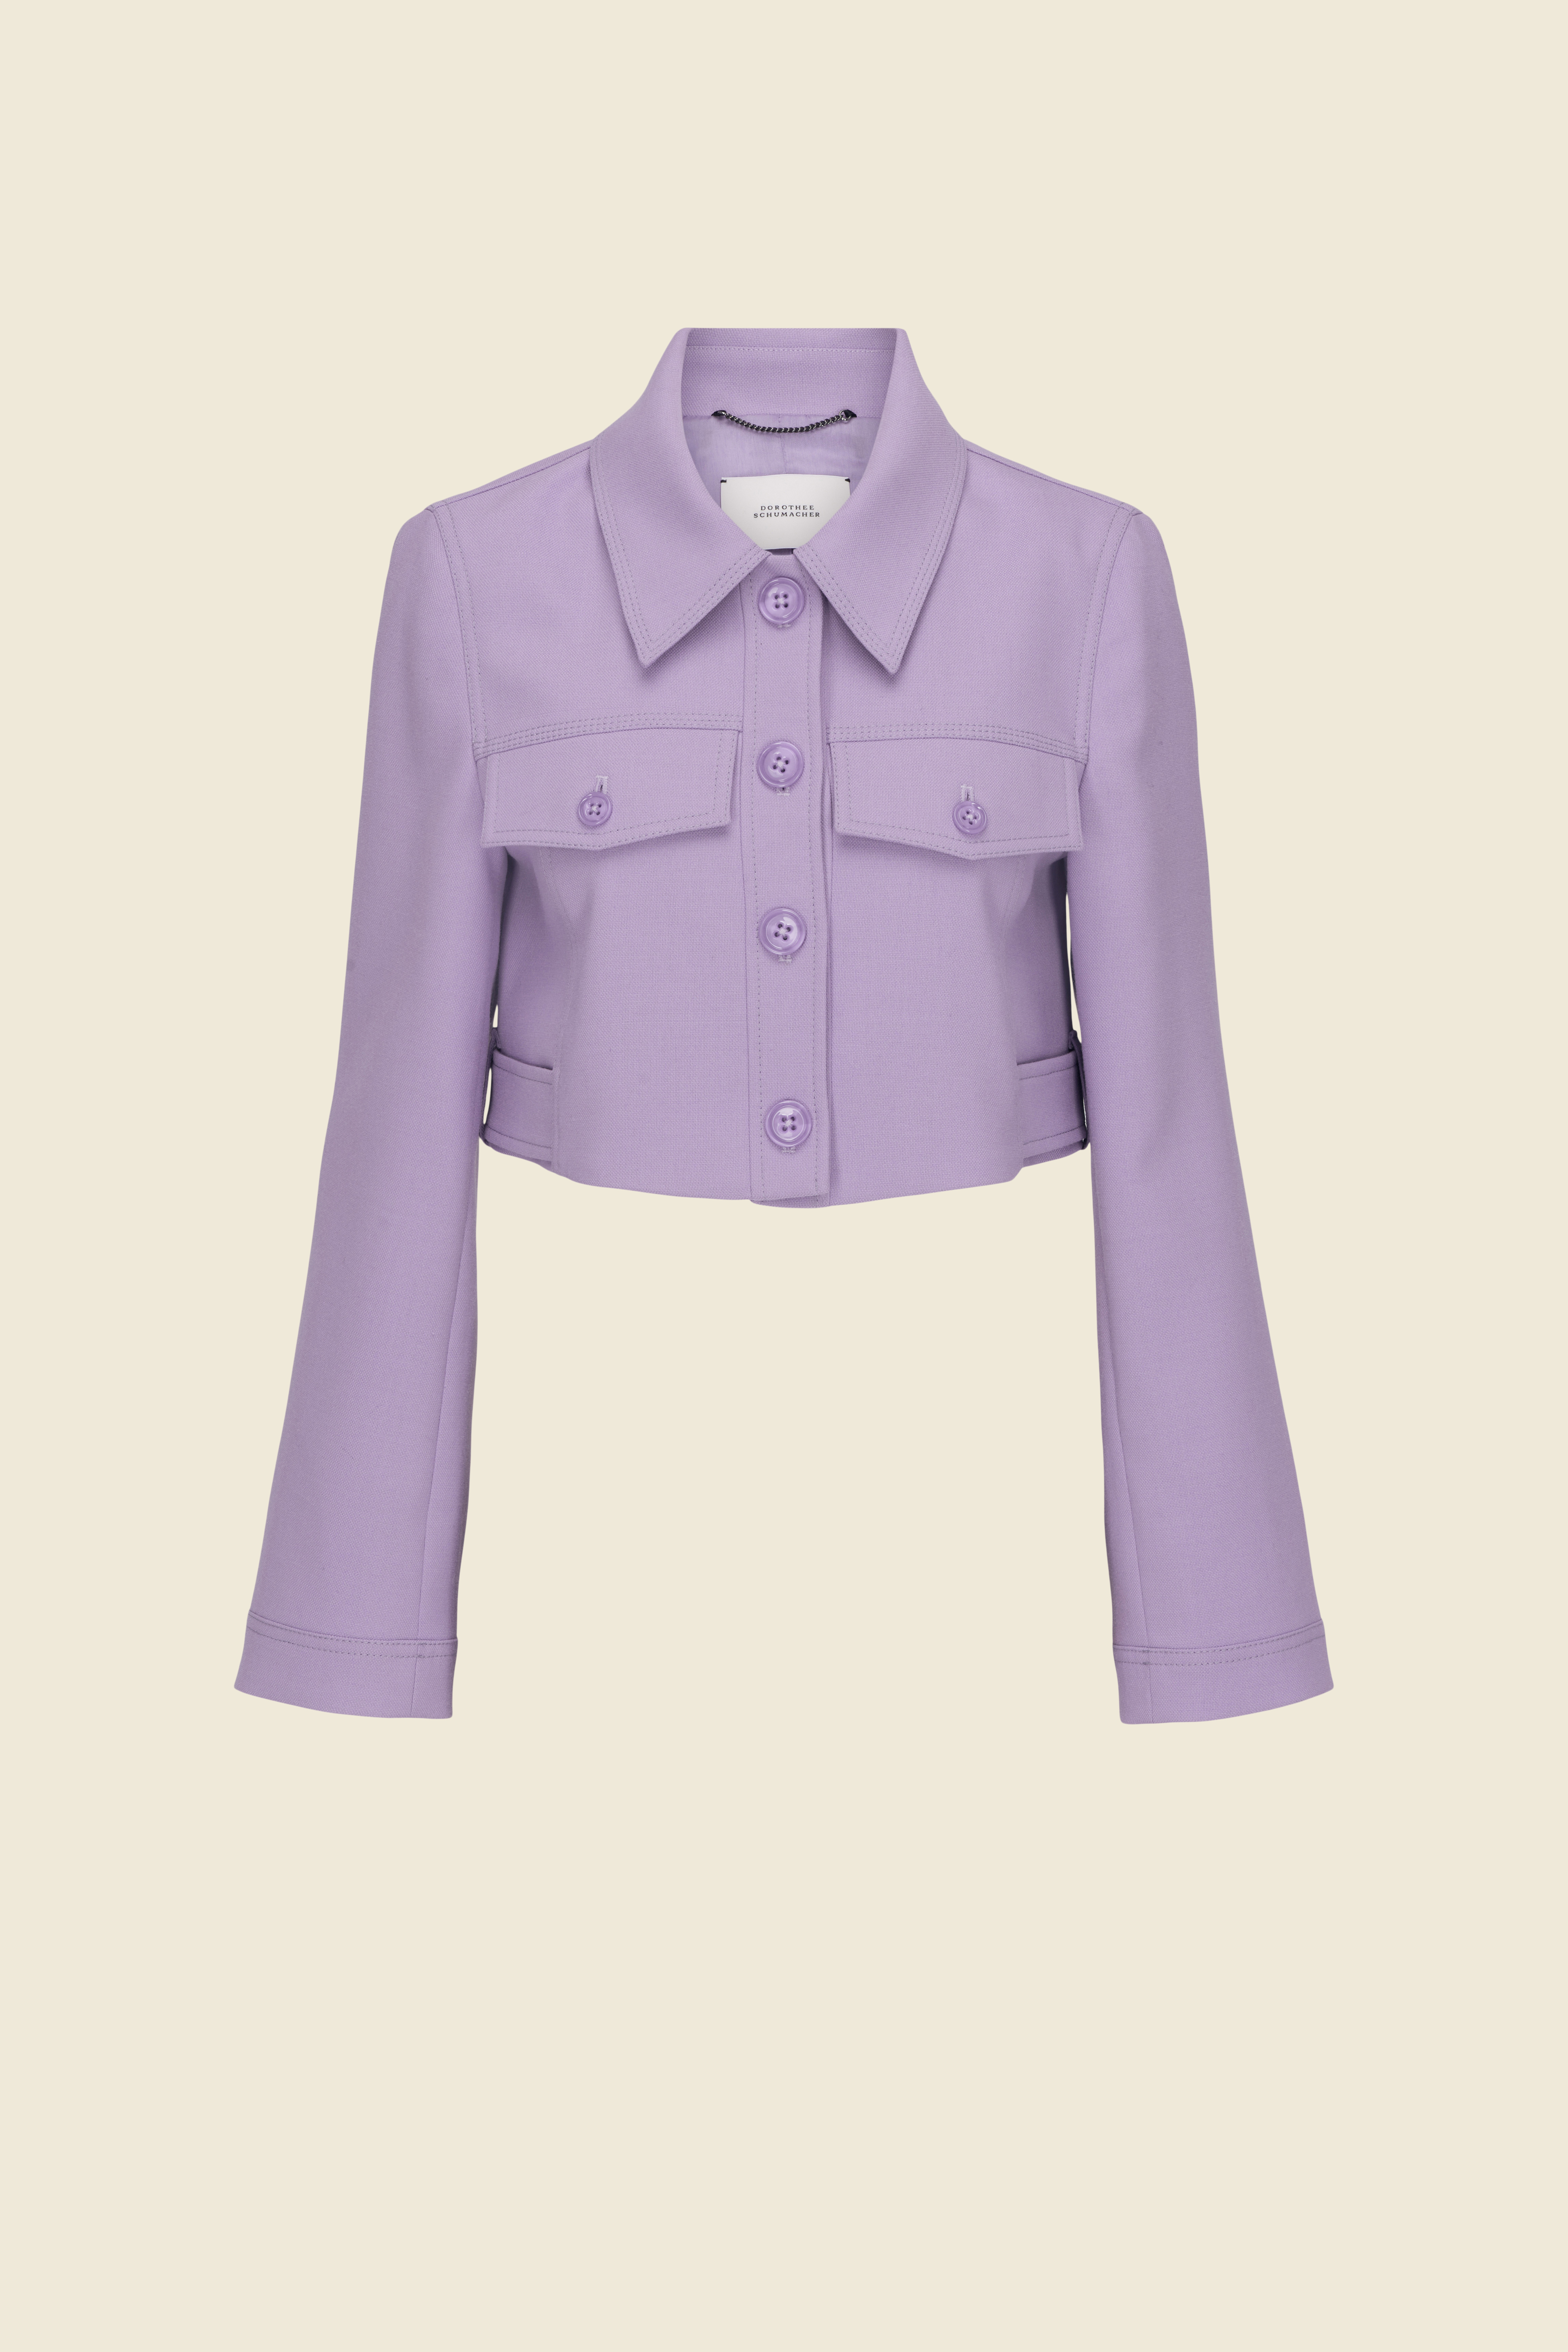 CROPPED JACKET WITH COLLAR Coats on sale 2022